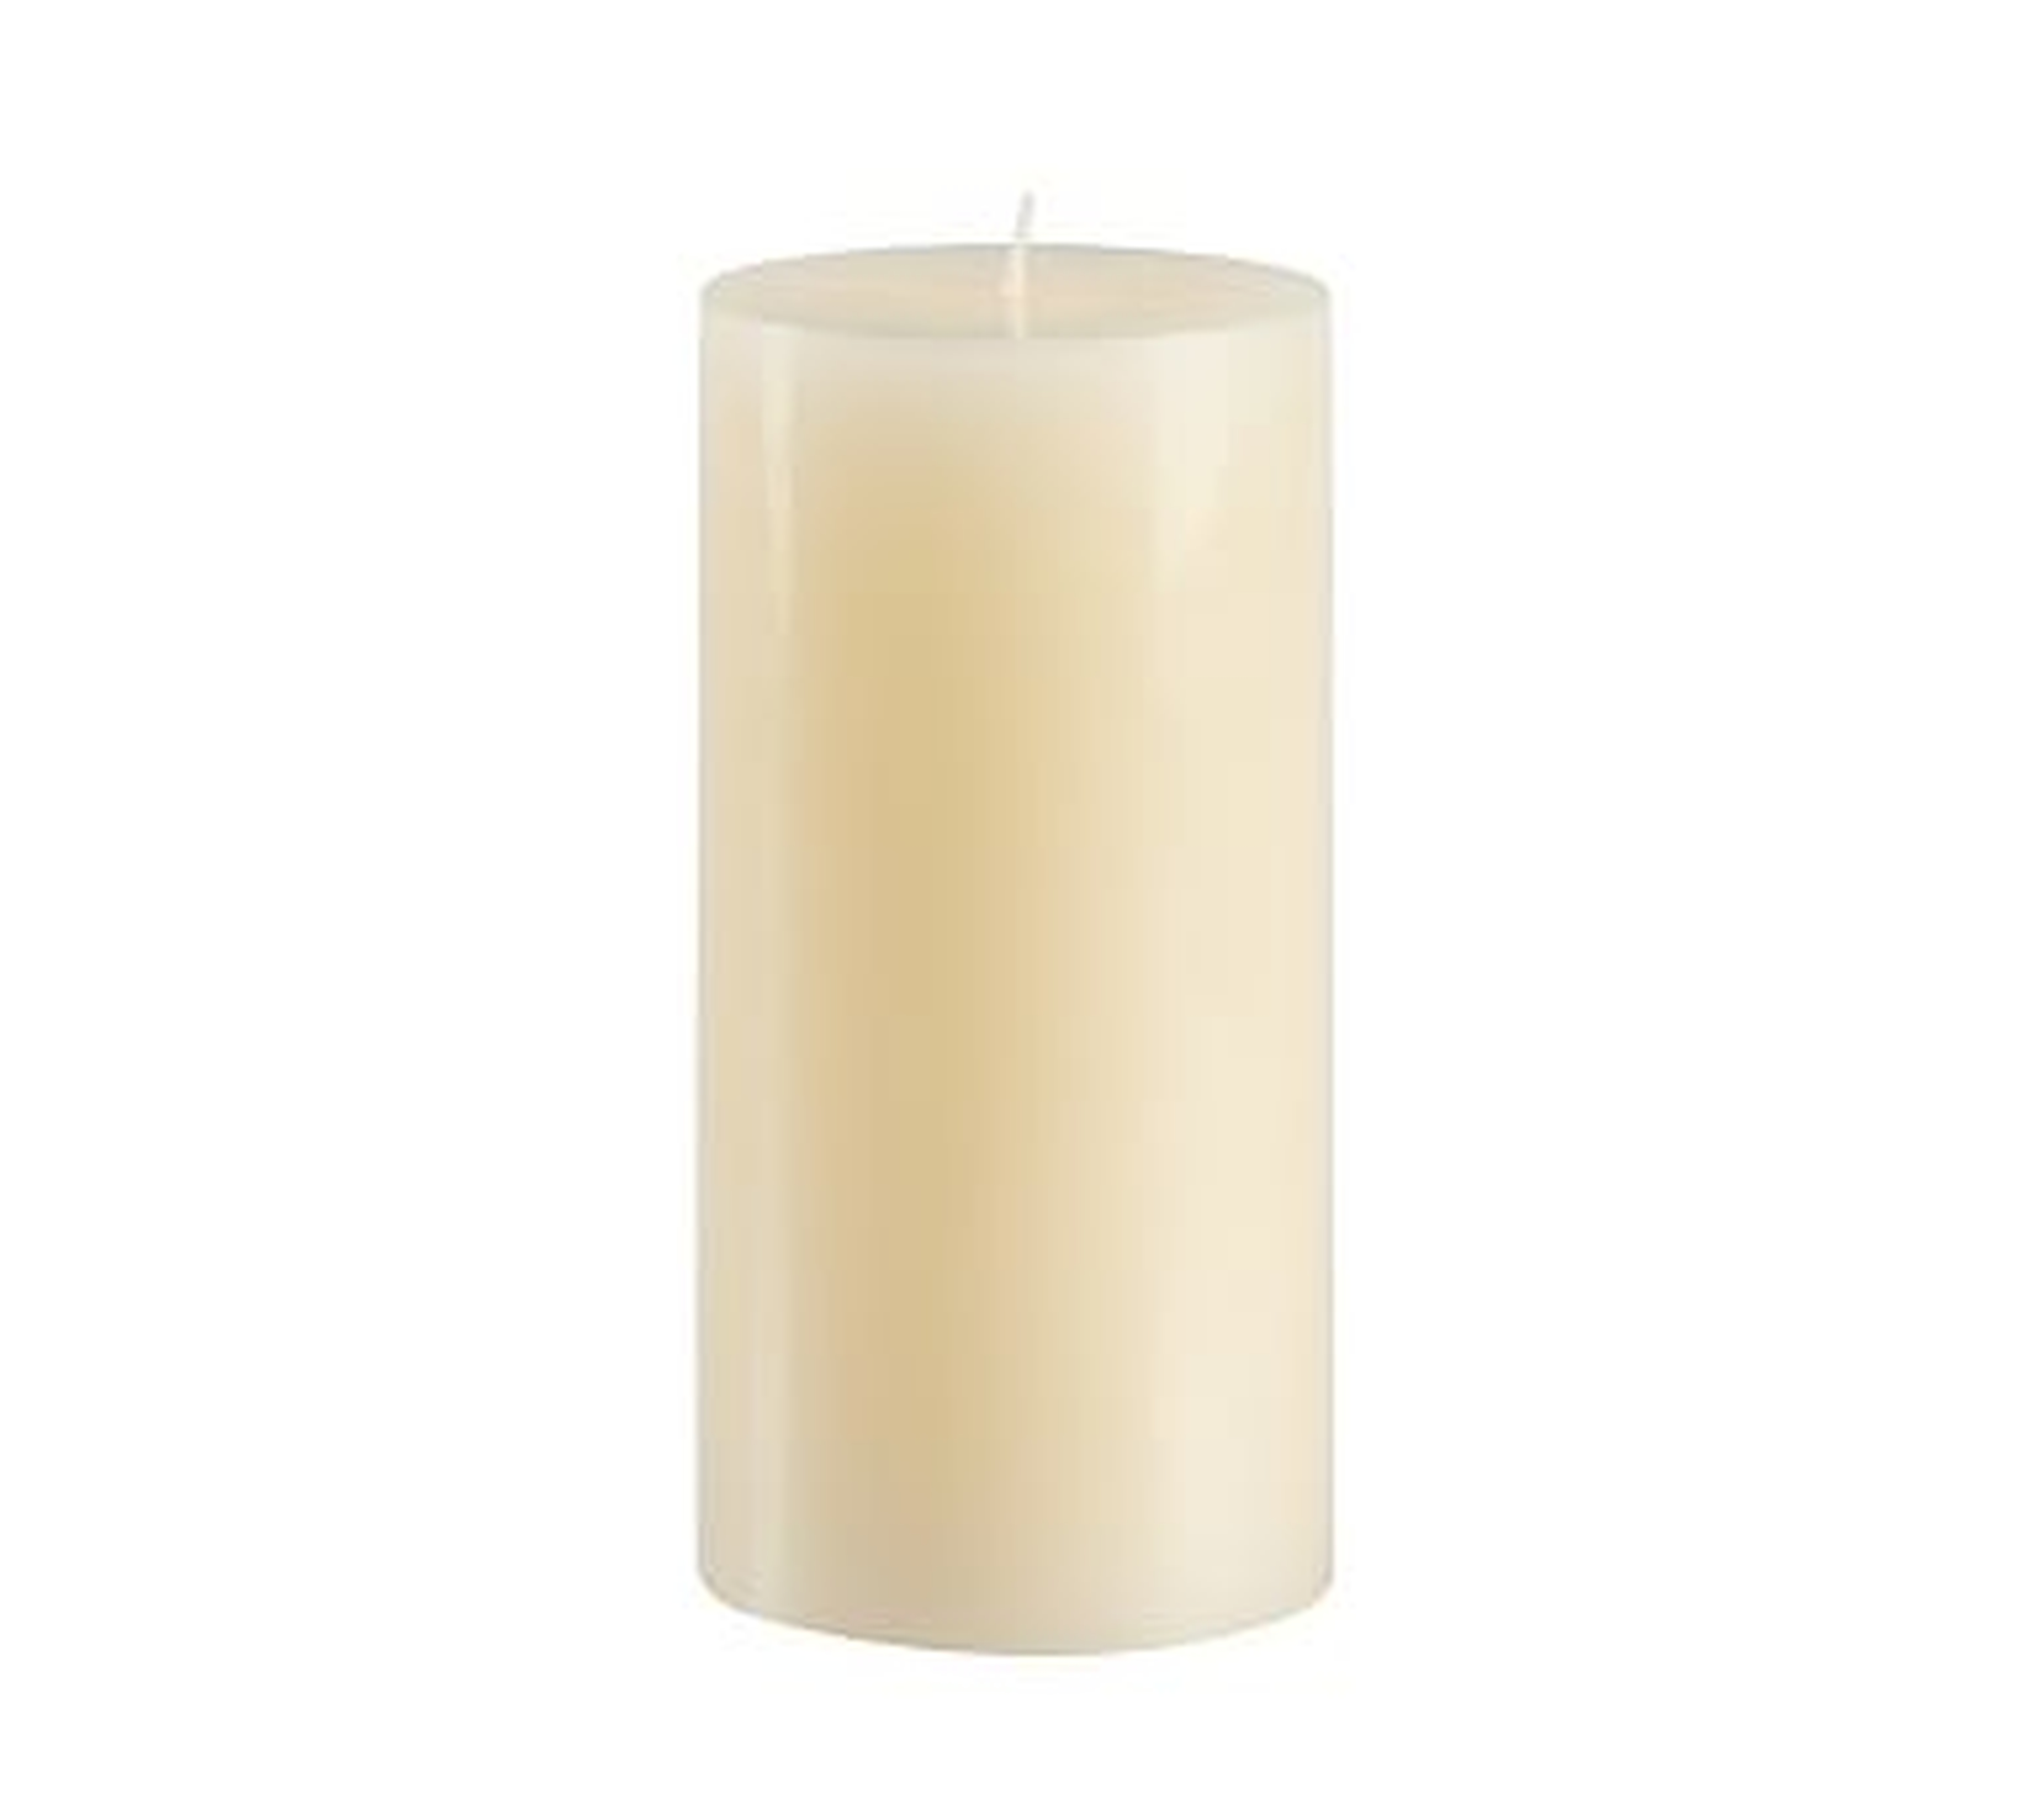 Unscented Wax Pillar Candle, 3"x6" - Ivory - Pottery Barn